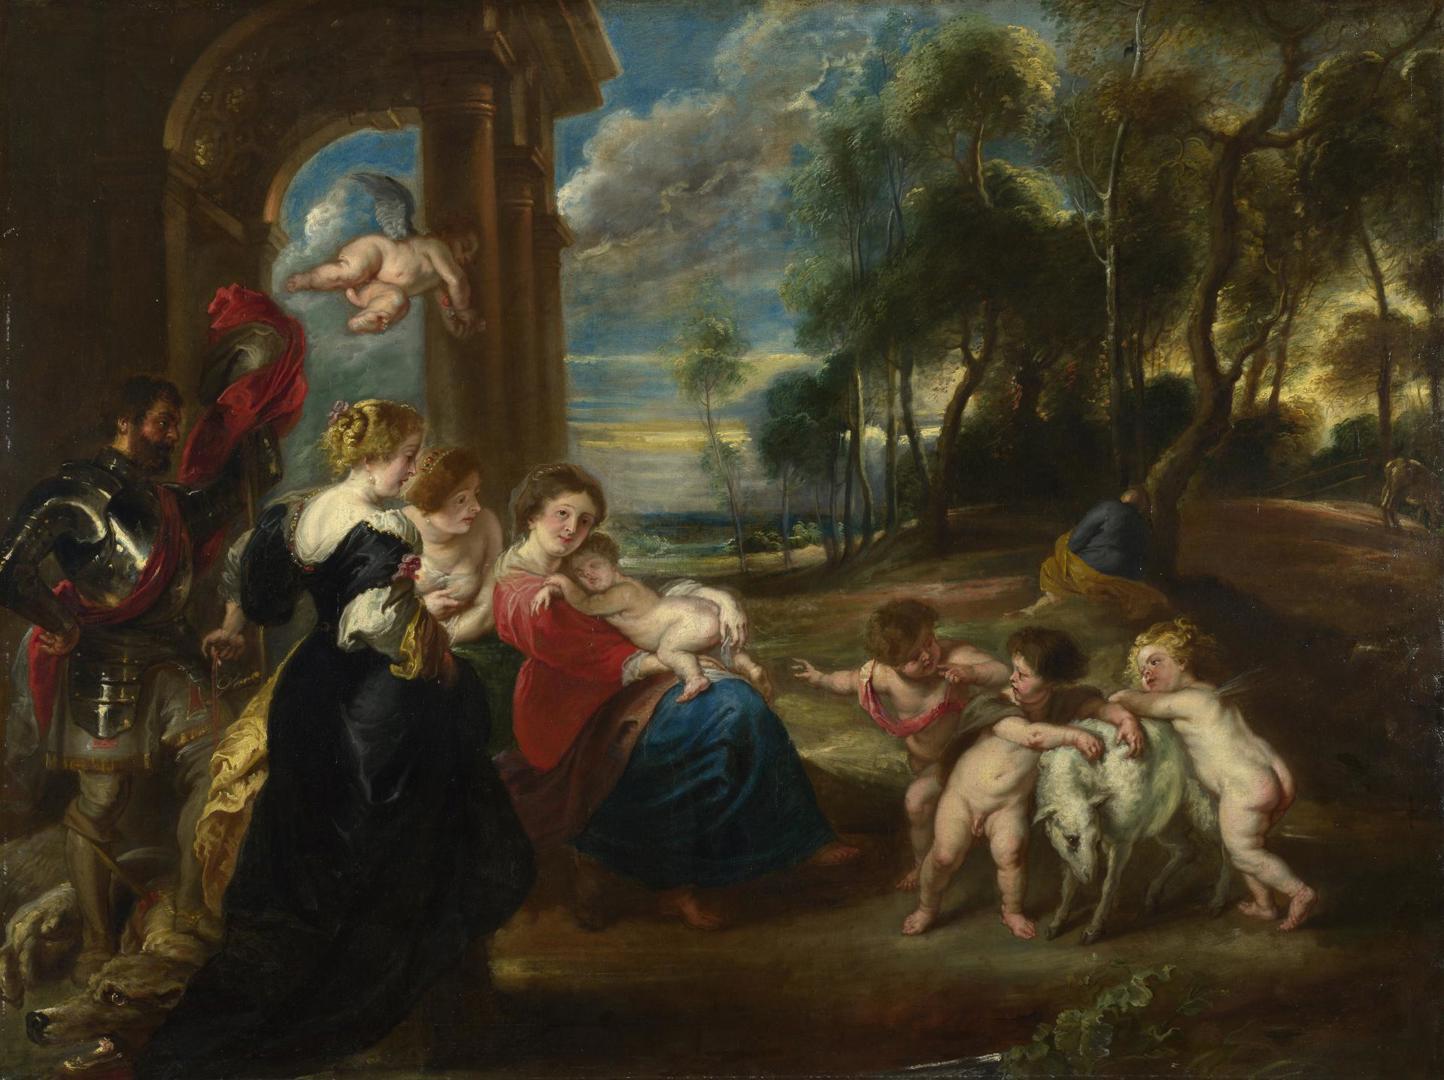 The Holy Family with Saints in a Landscape by Studio of Peter Paul Rubens